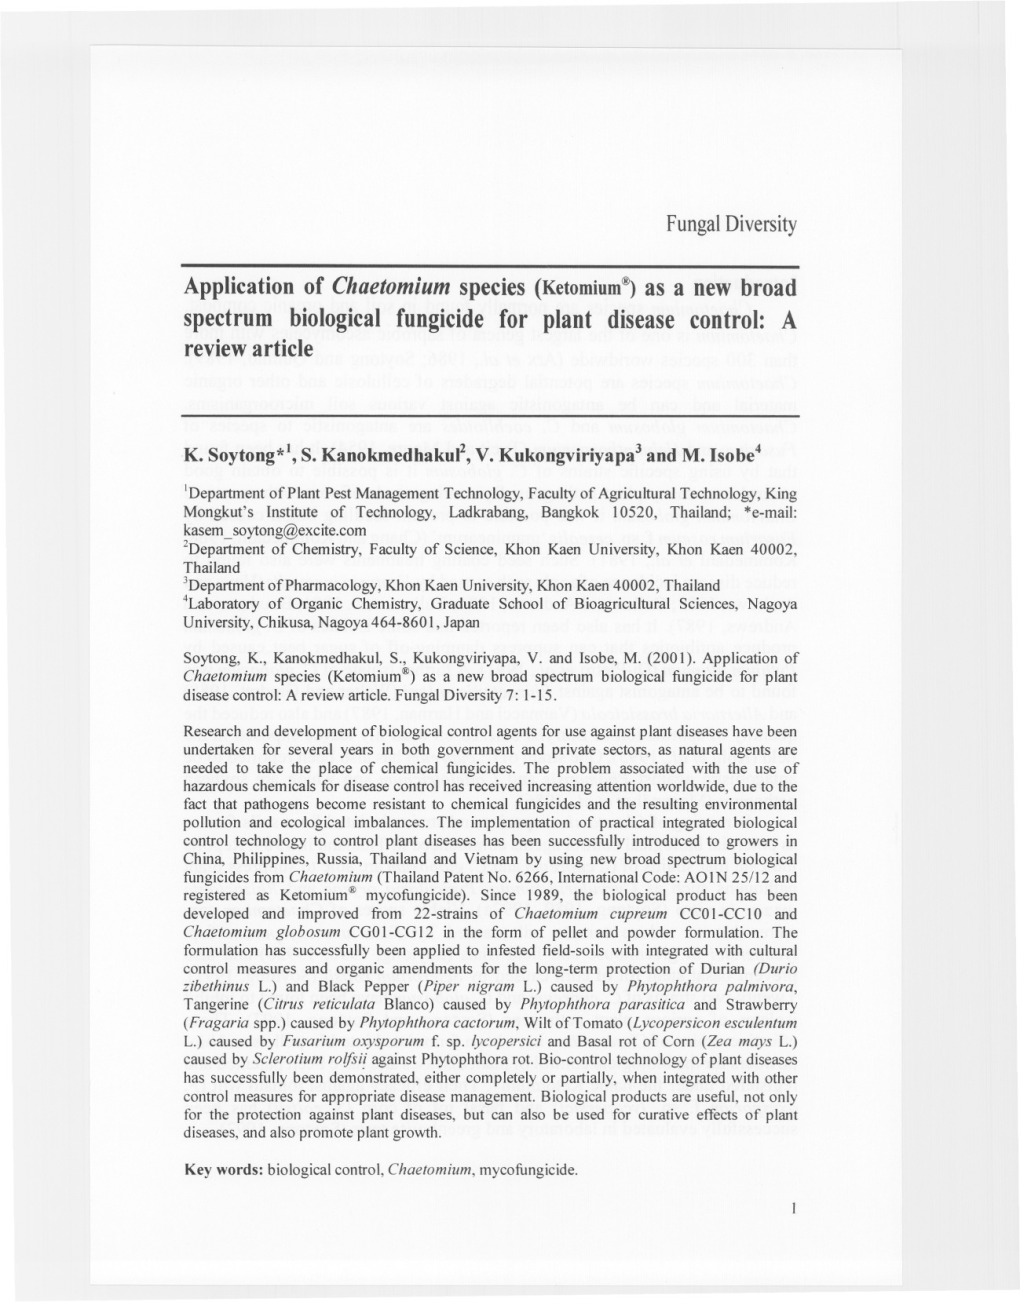 Application of Chaetomium Species (Ketomium®) As a New Broad Spectrum Biological Fungicide for Plant Disease Control: a Review Article